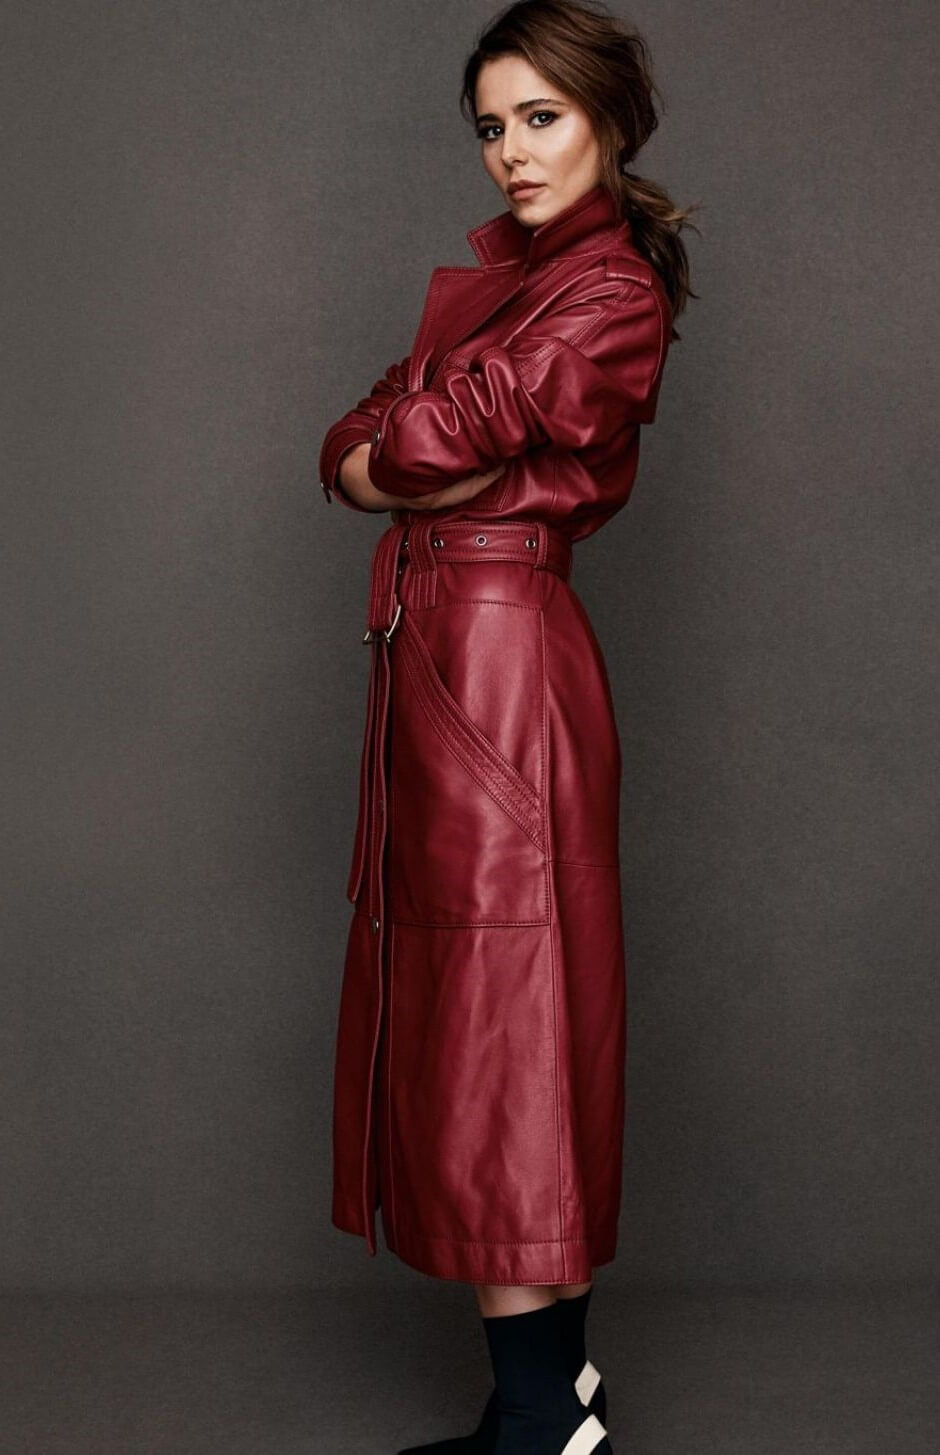 Cheryl Tweedy  In Maroon Long Leather Outfit At The Times Magazine